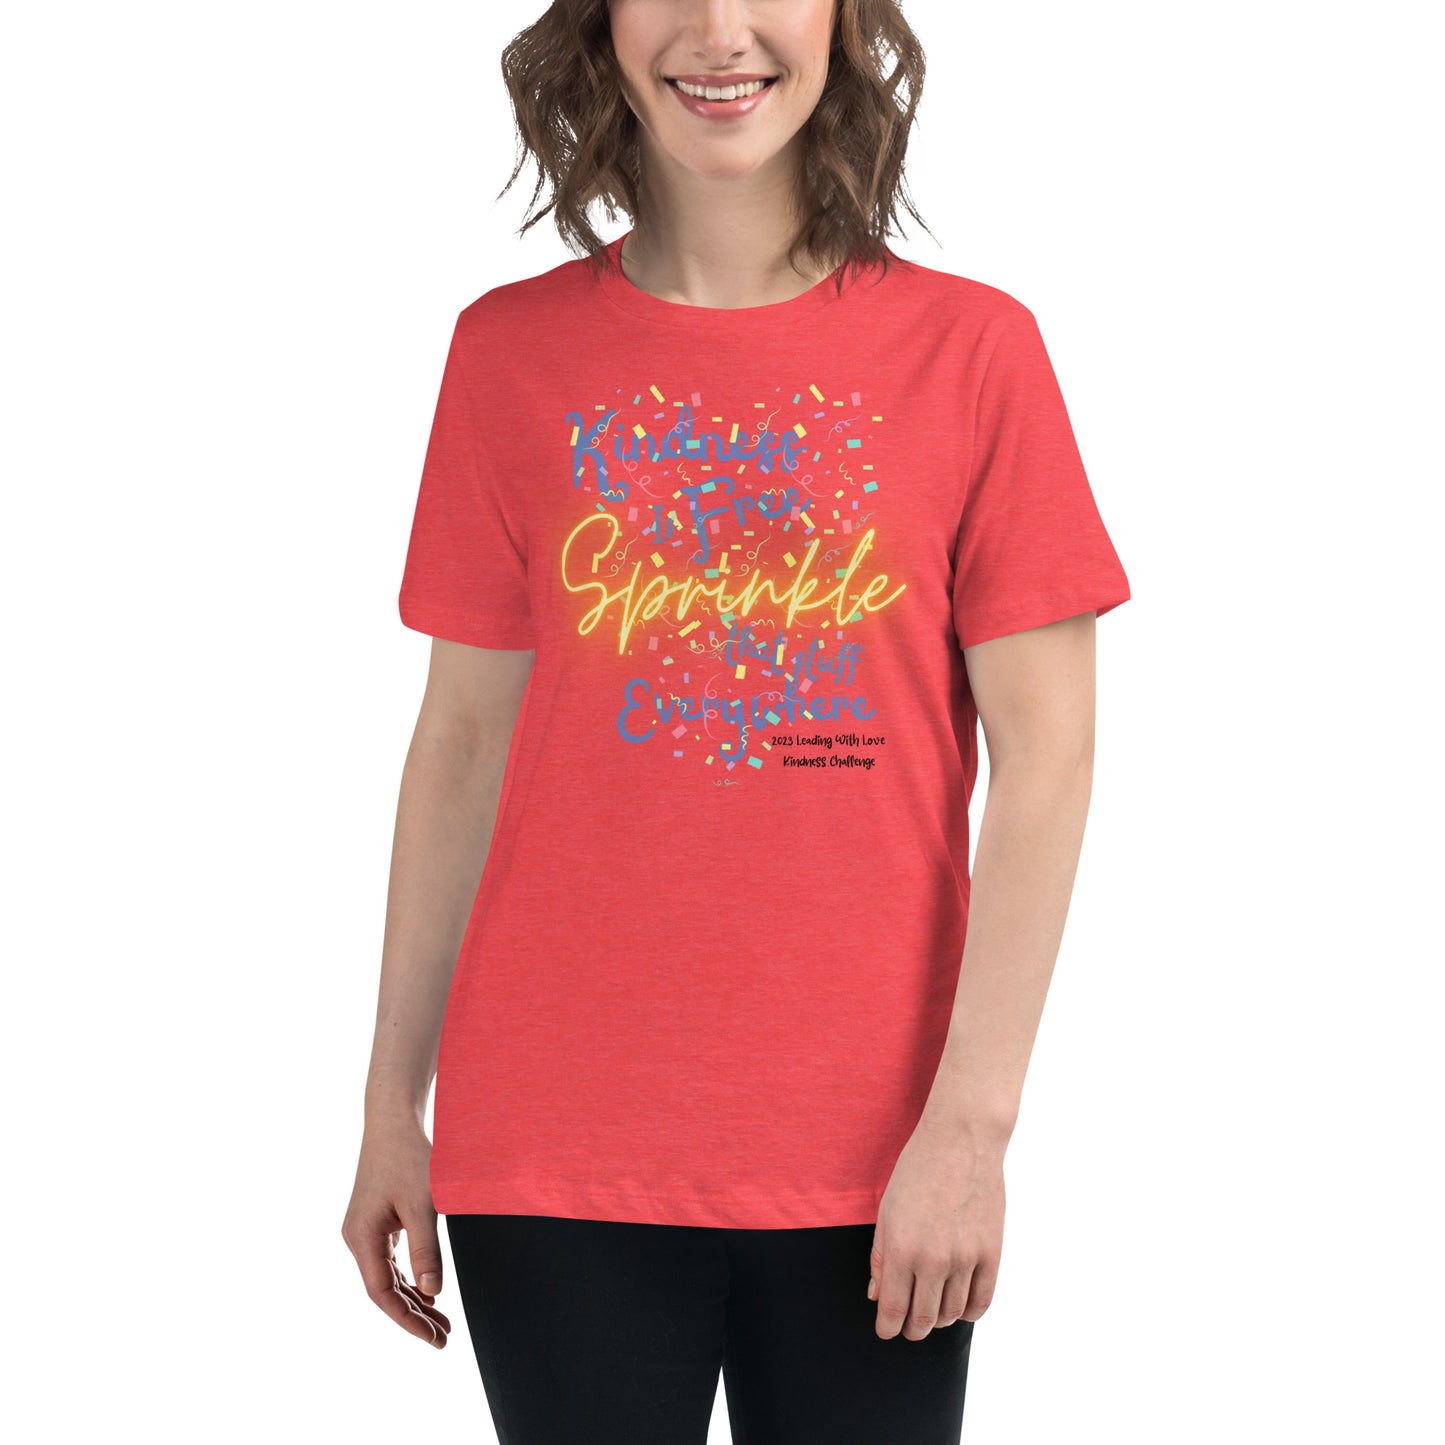 Sprinkle of Kindness Women's Relaxed T-Shirt